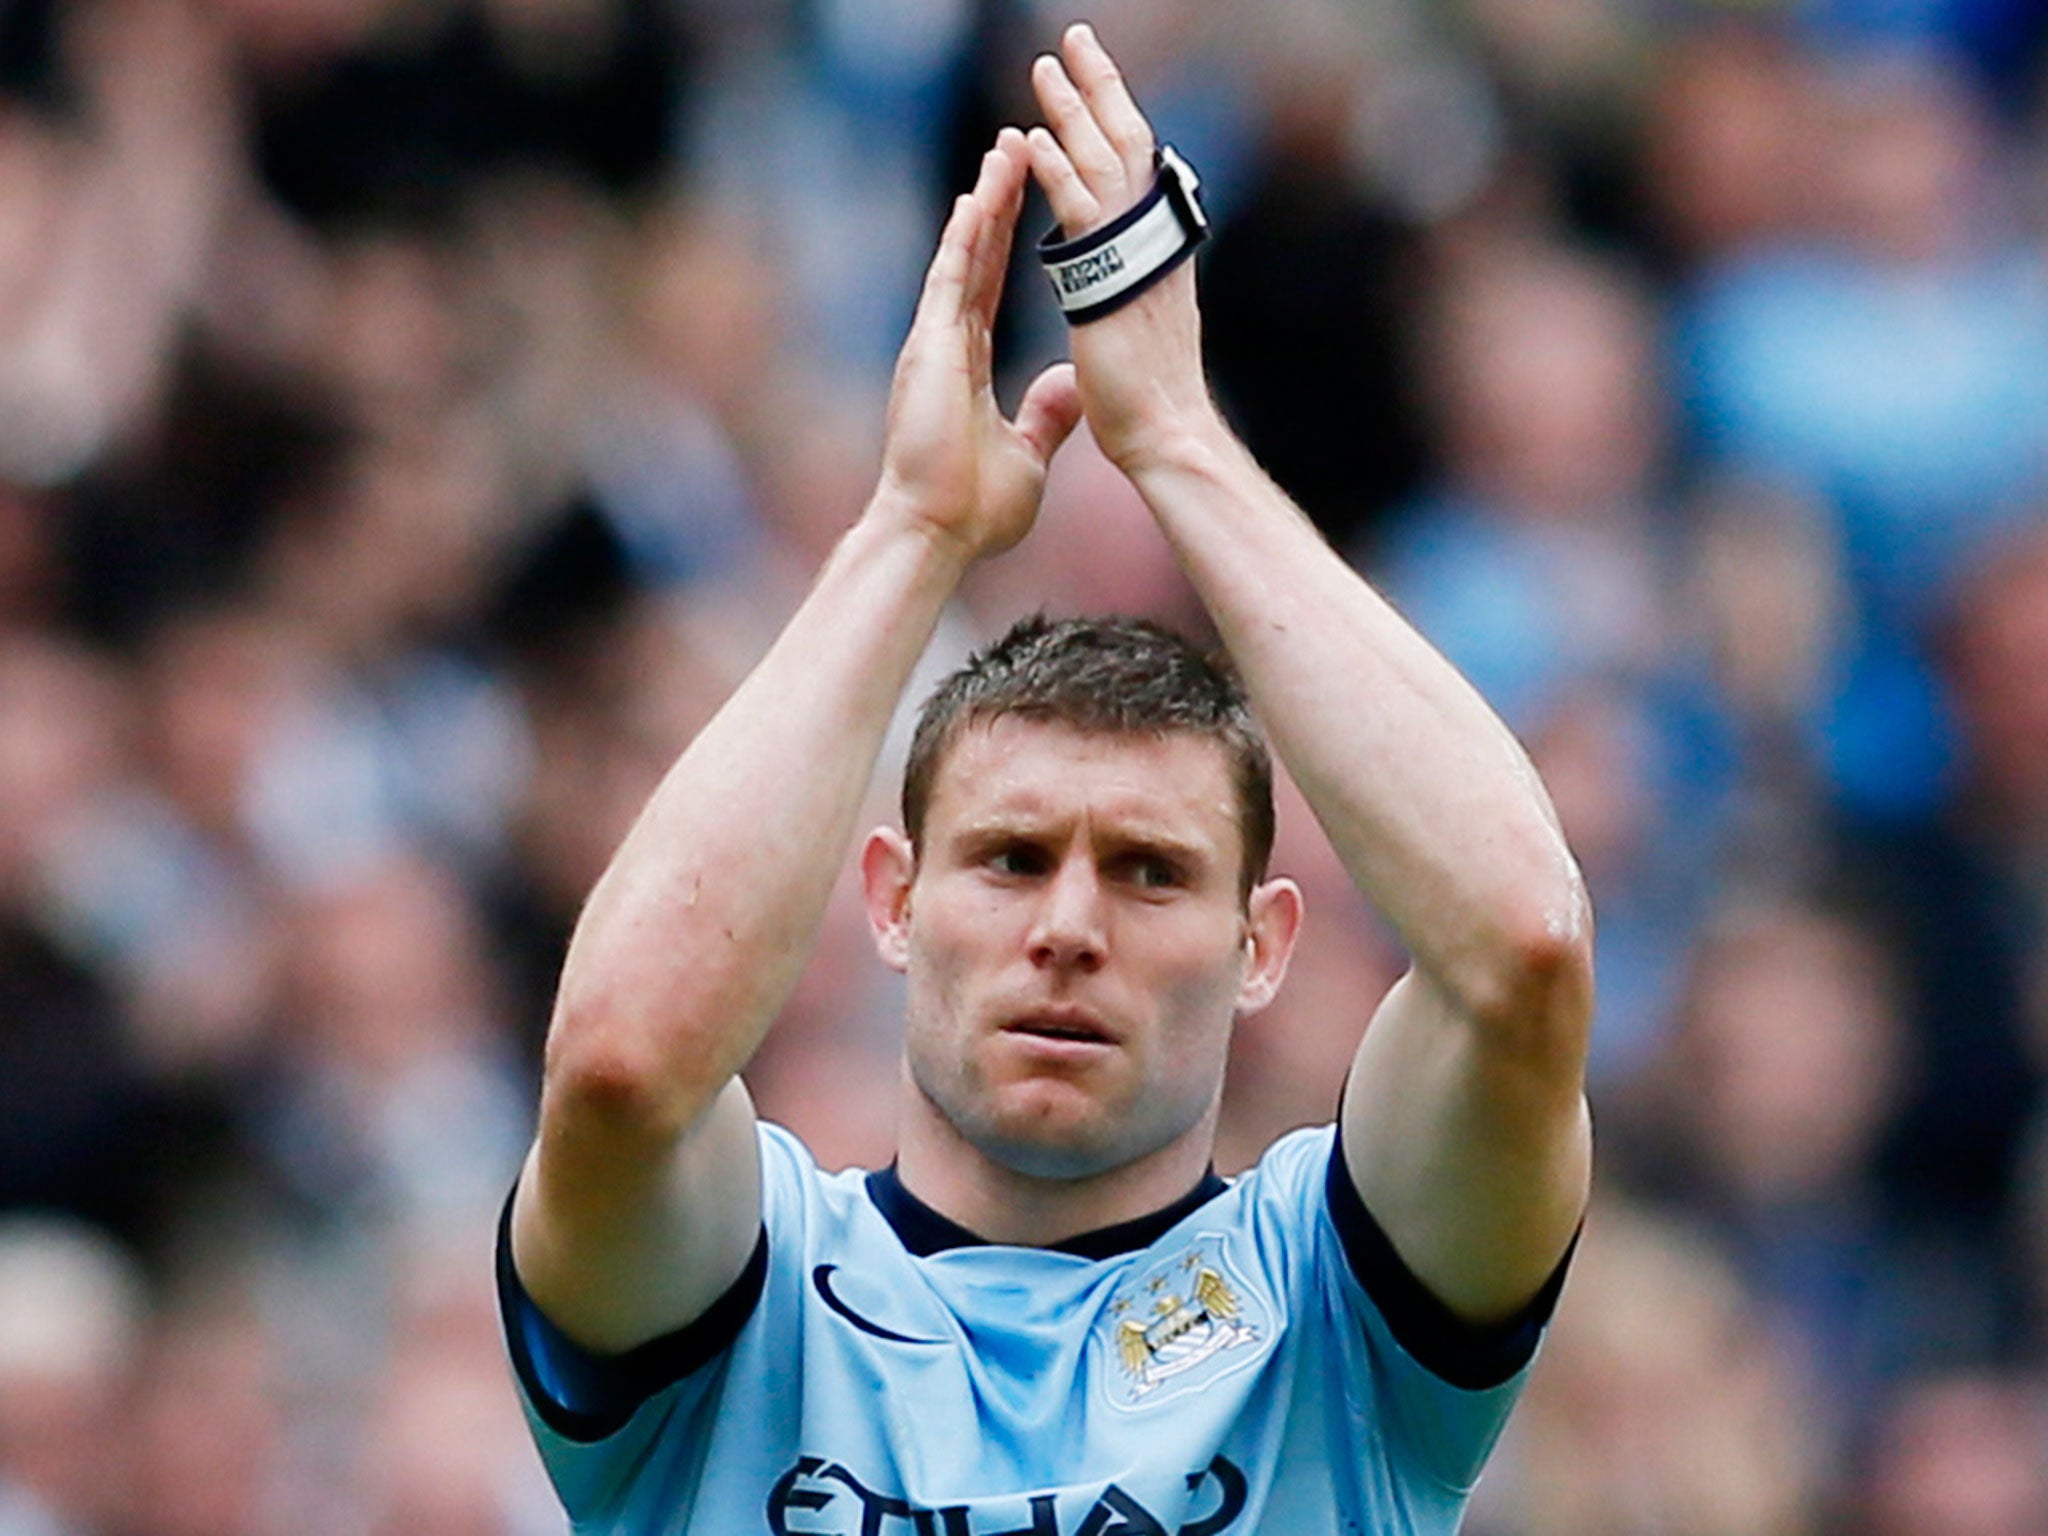 James Milner is set to sign for Liverpool this week despite rival interest from Arsenal